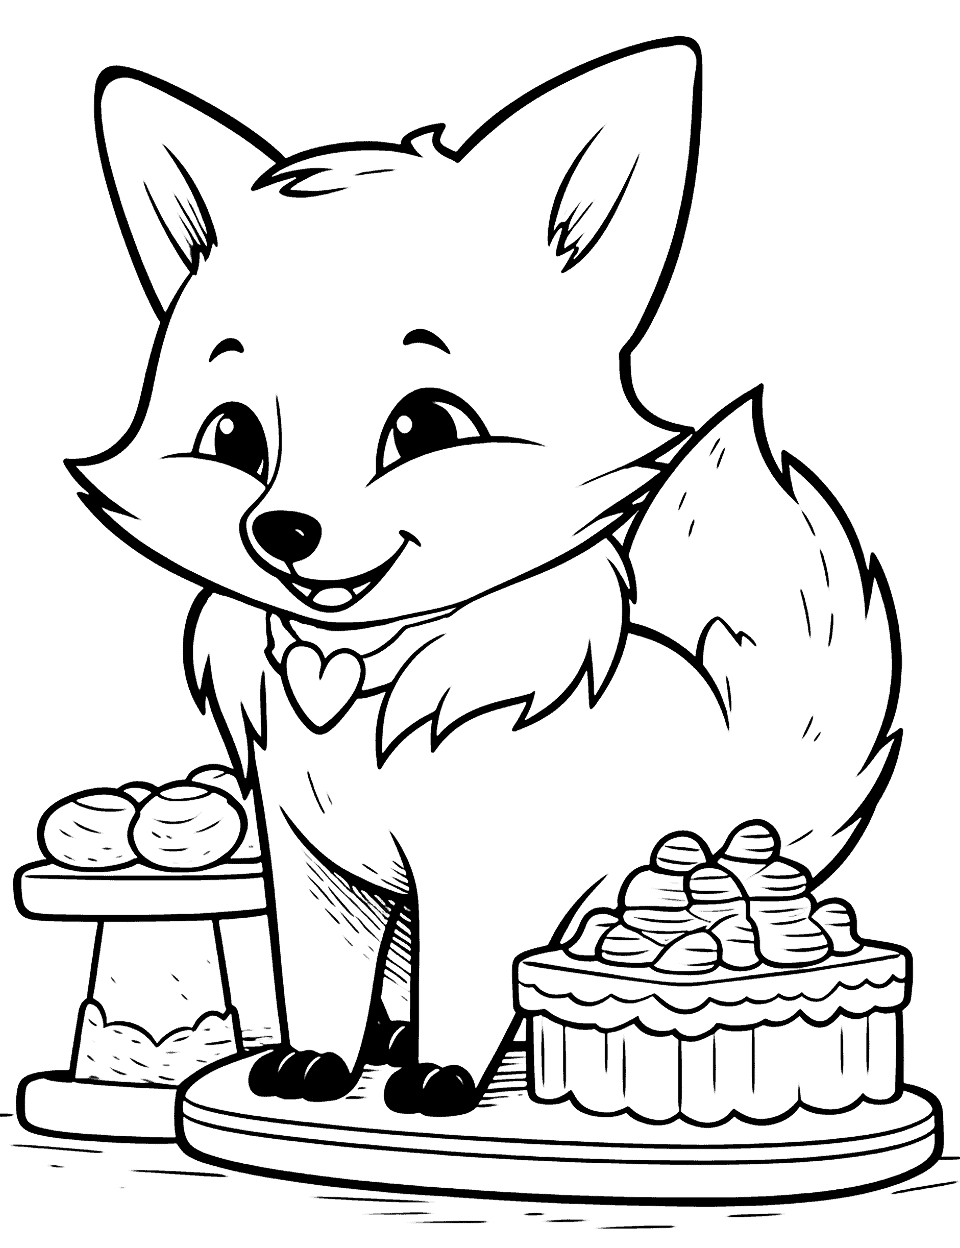 Fox's Bakery Delight Fox Coloring Page - Our fox runs a delightful little bakery.